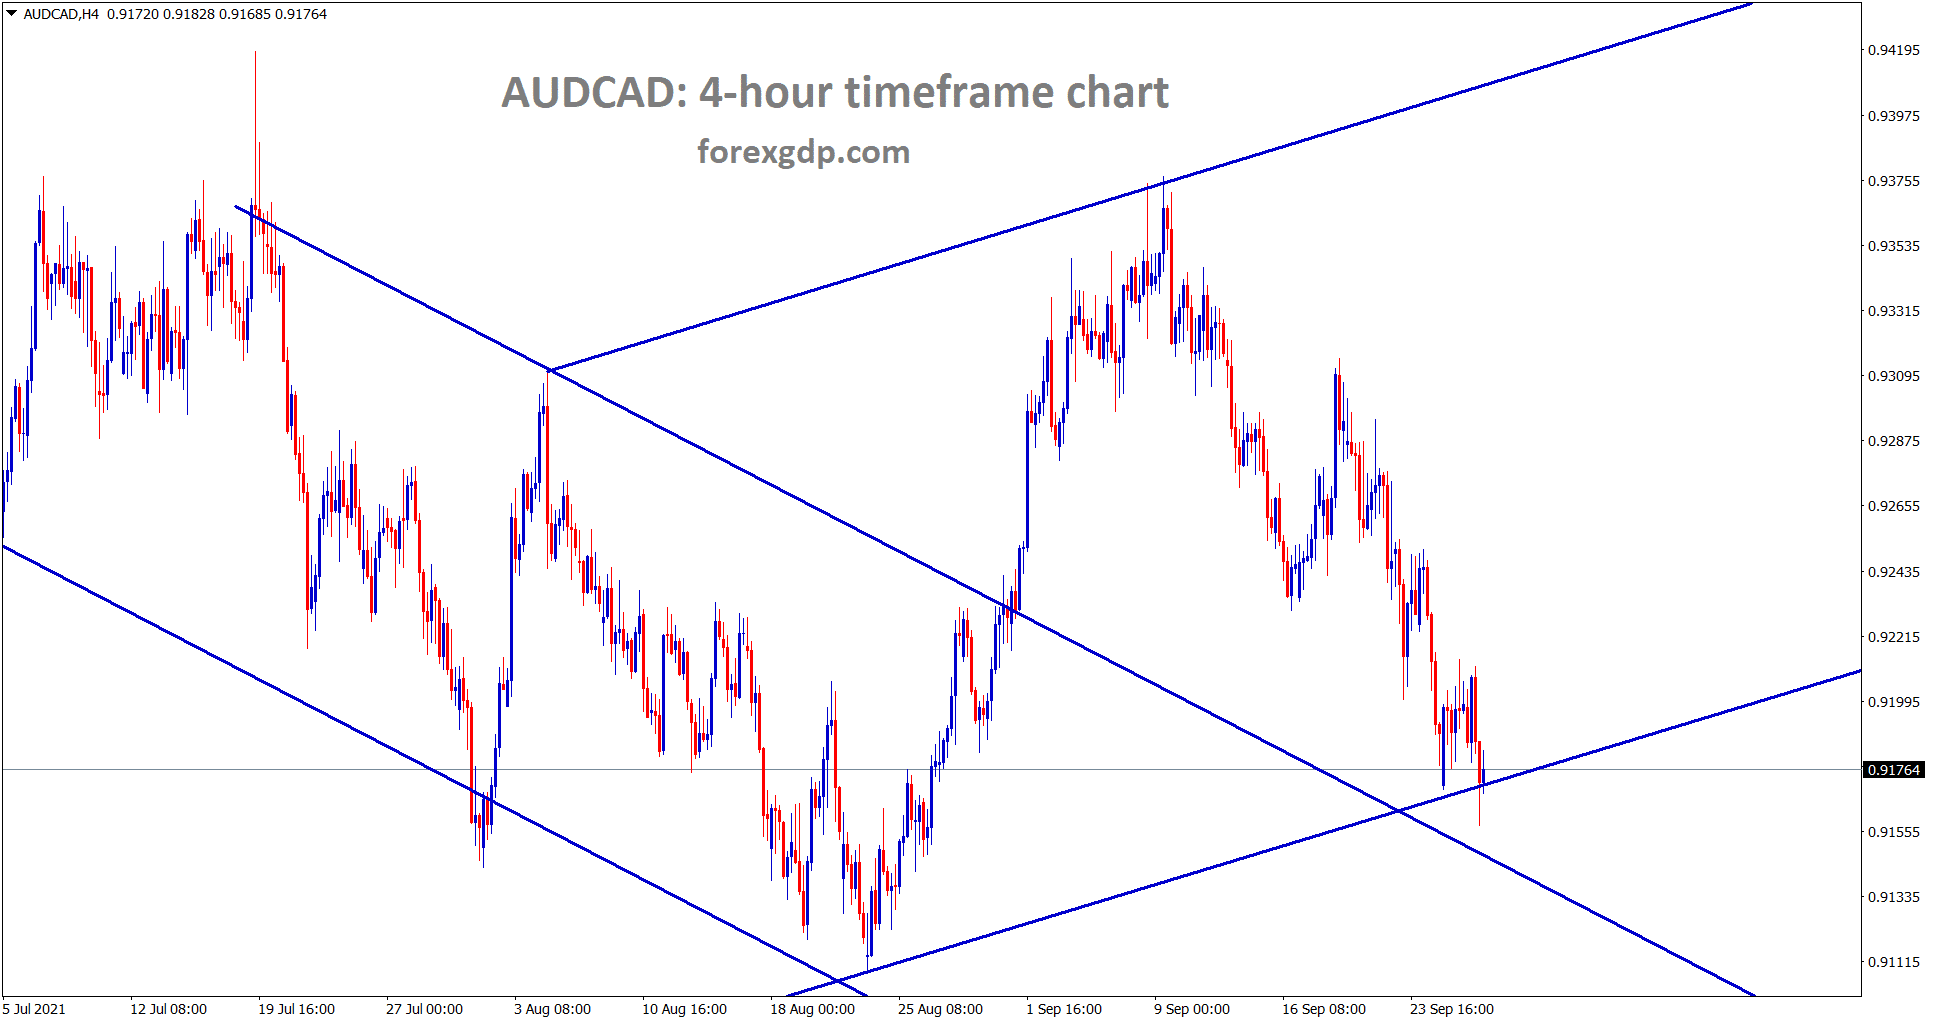 AUDCAD is standing at the higher low and retest area of the previous broken descending channel